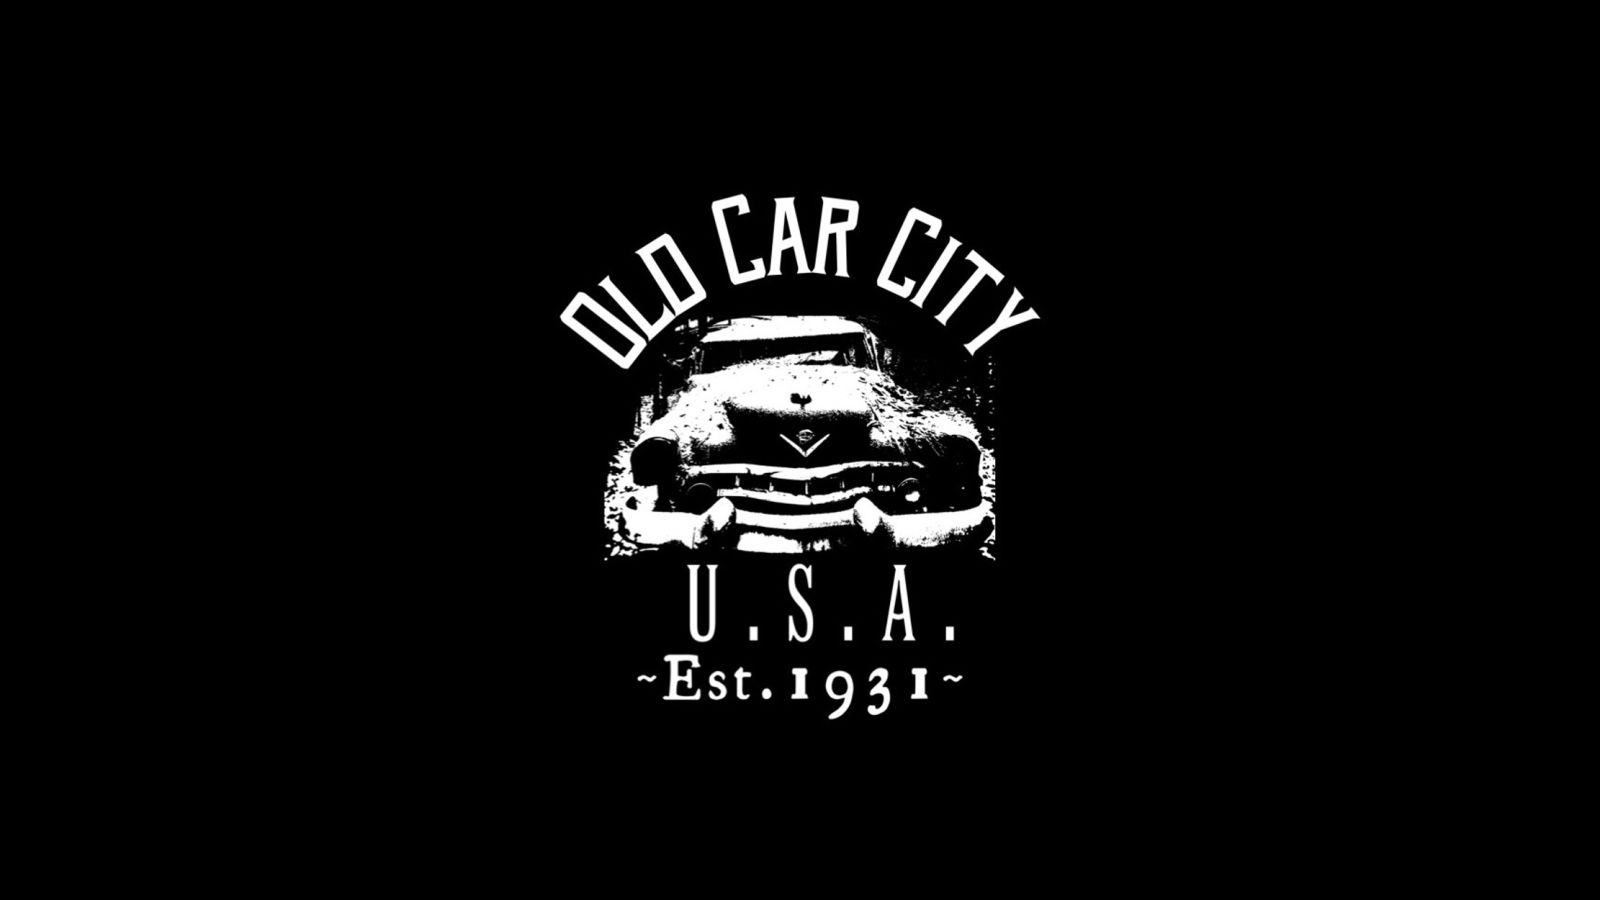 Illustration for article titled Old Car City USA: The Oppositelock Review and Photographic Journey